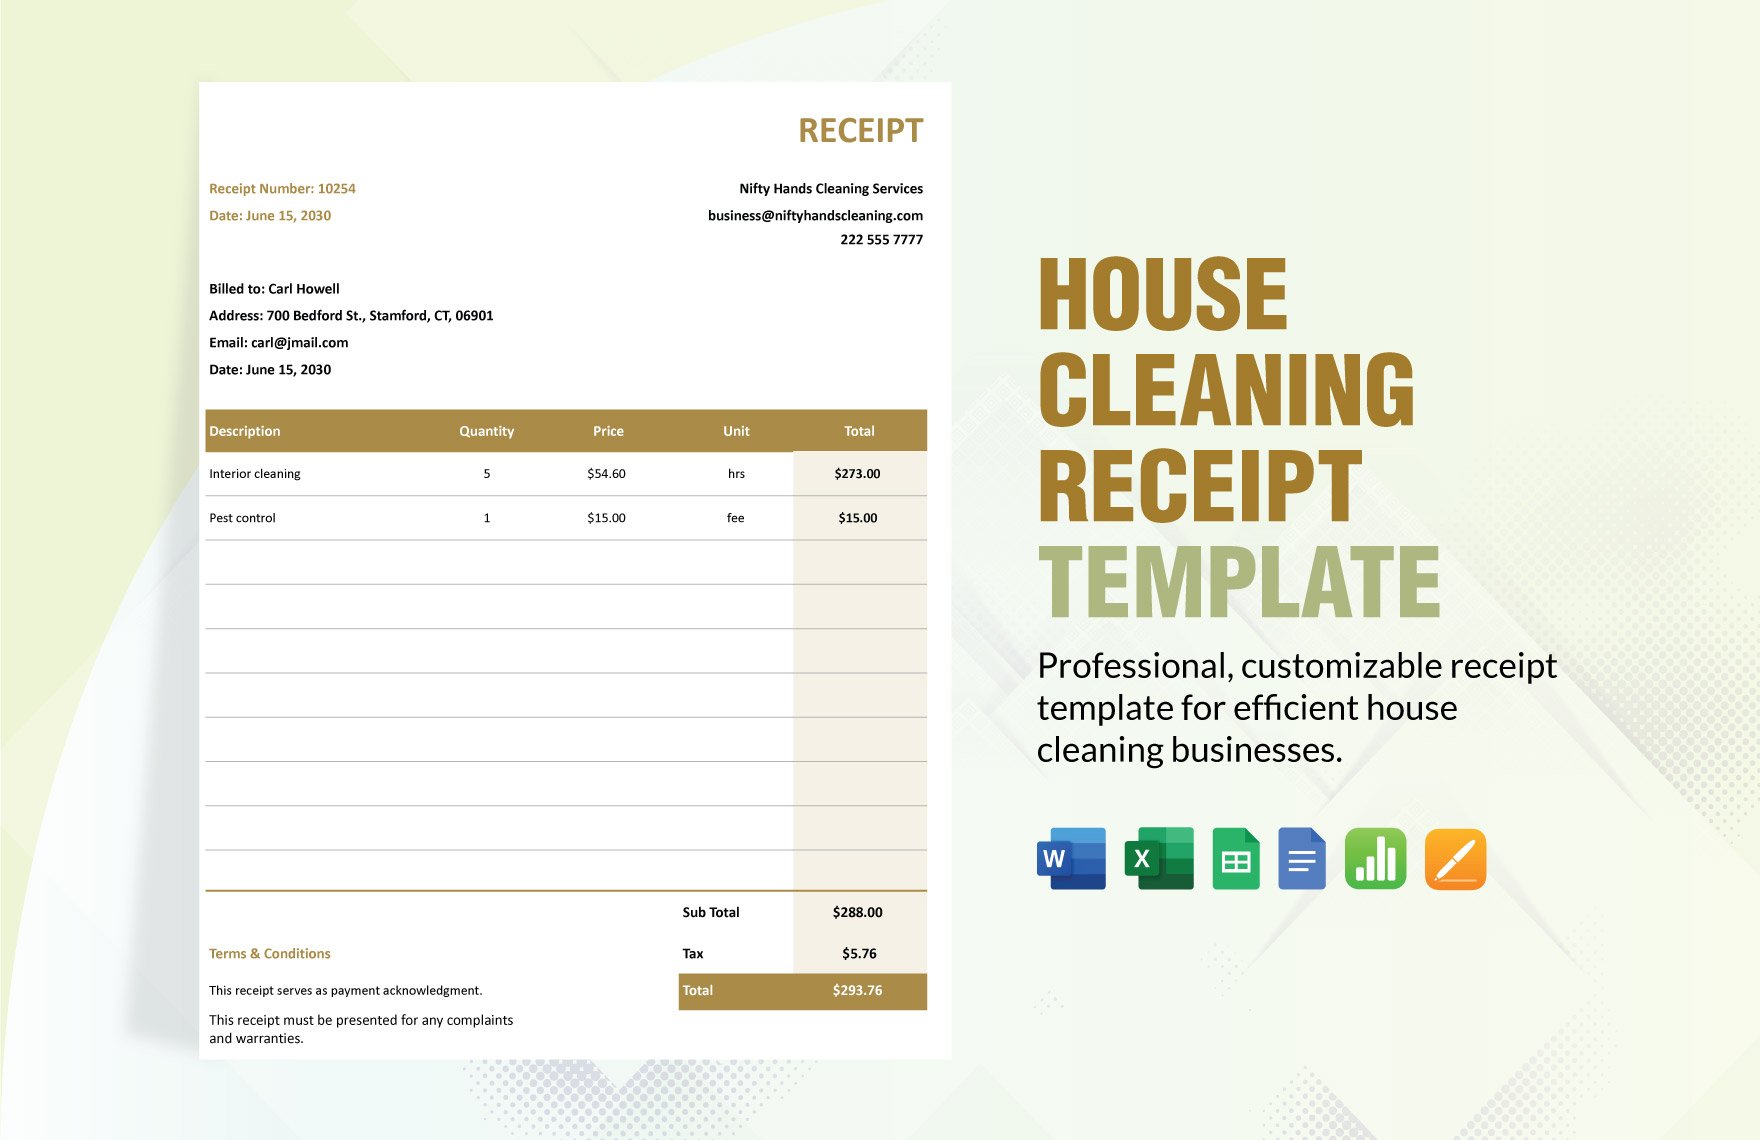 House Cleaning Receipt Template in Word, Google Docs, Excel, Google Sheets, Apple Pages, Apple Numbers